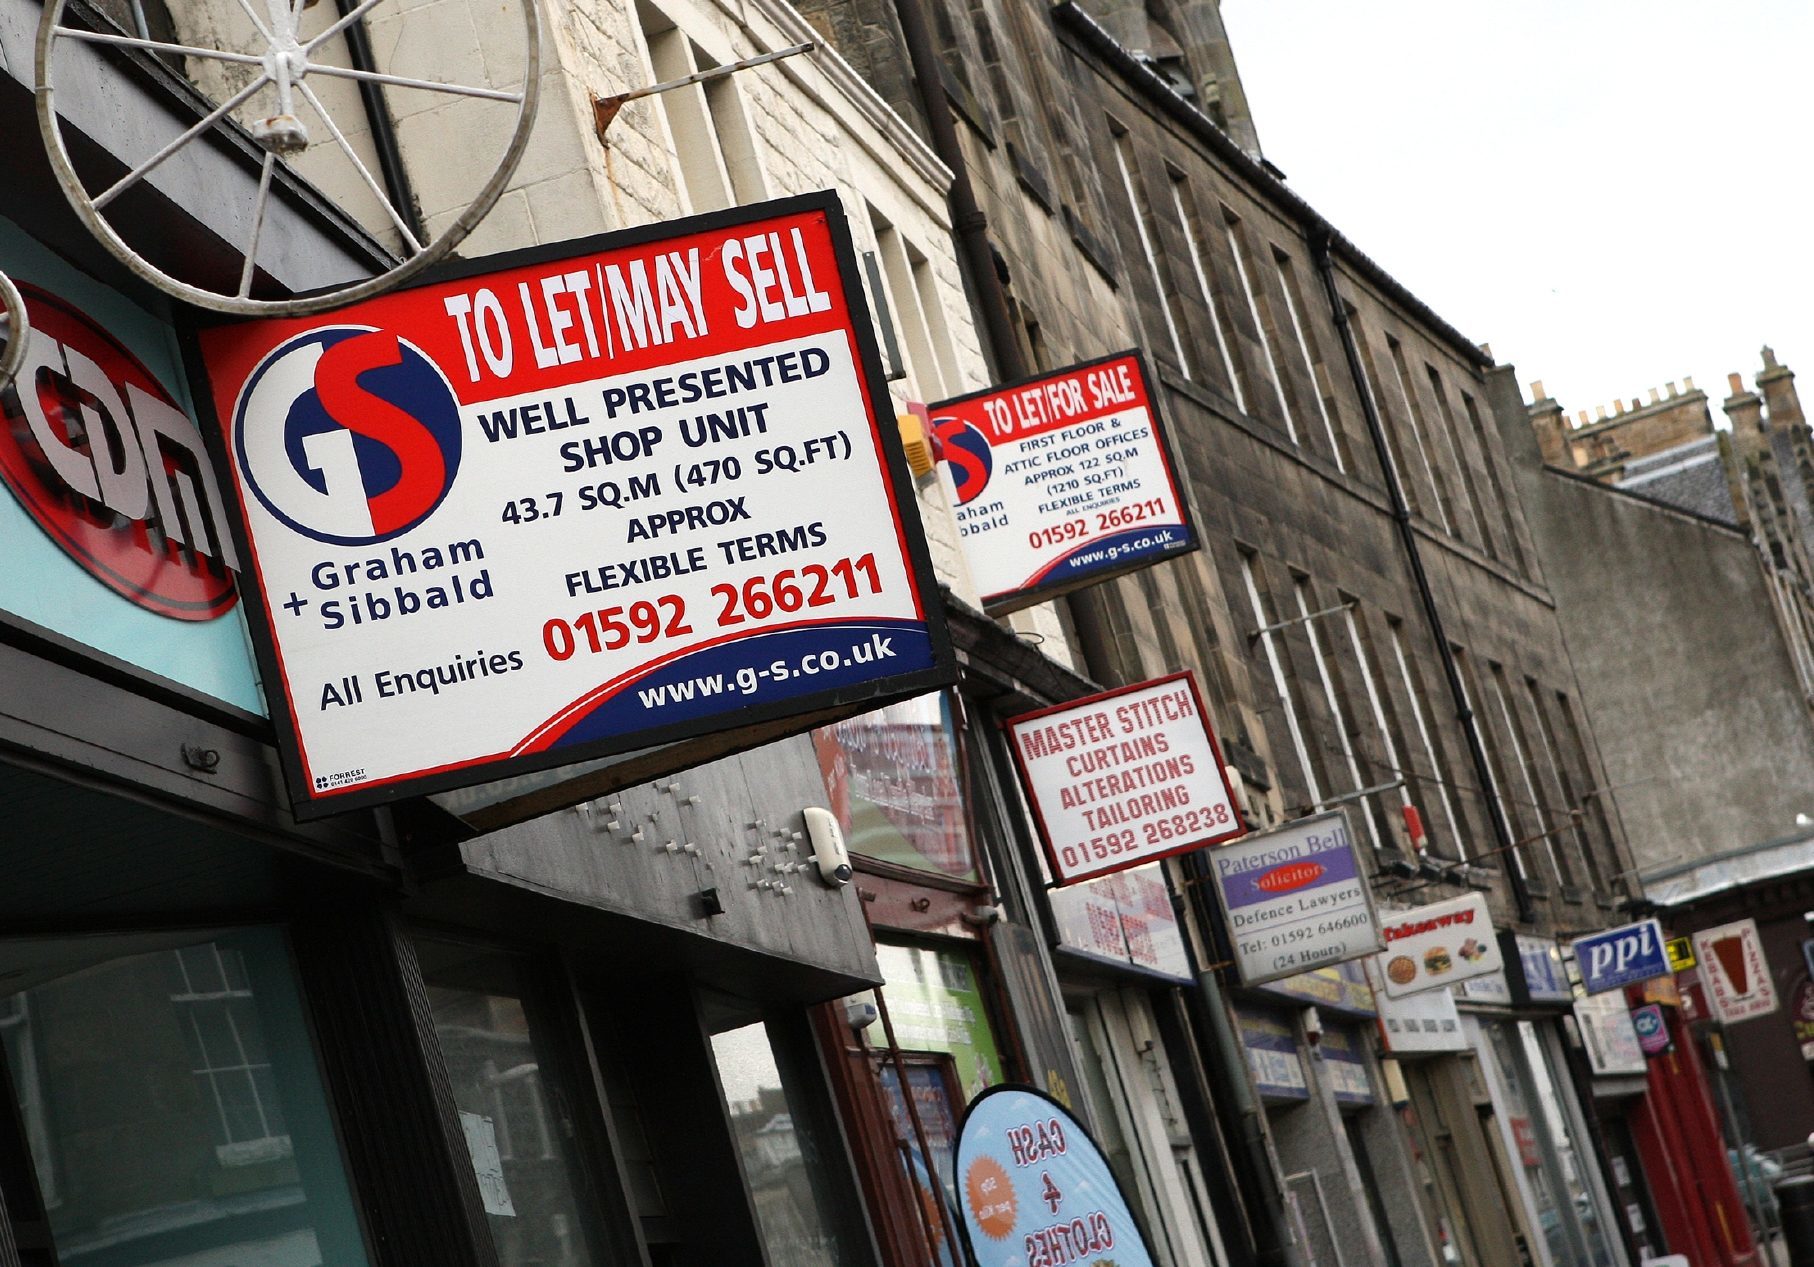 To Let shop units on Kirkcaldy High Street in 2016